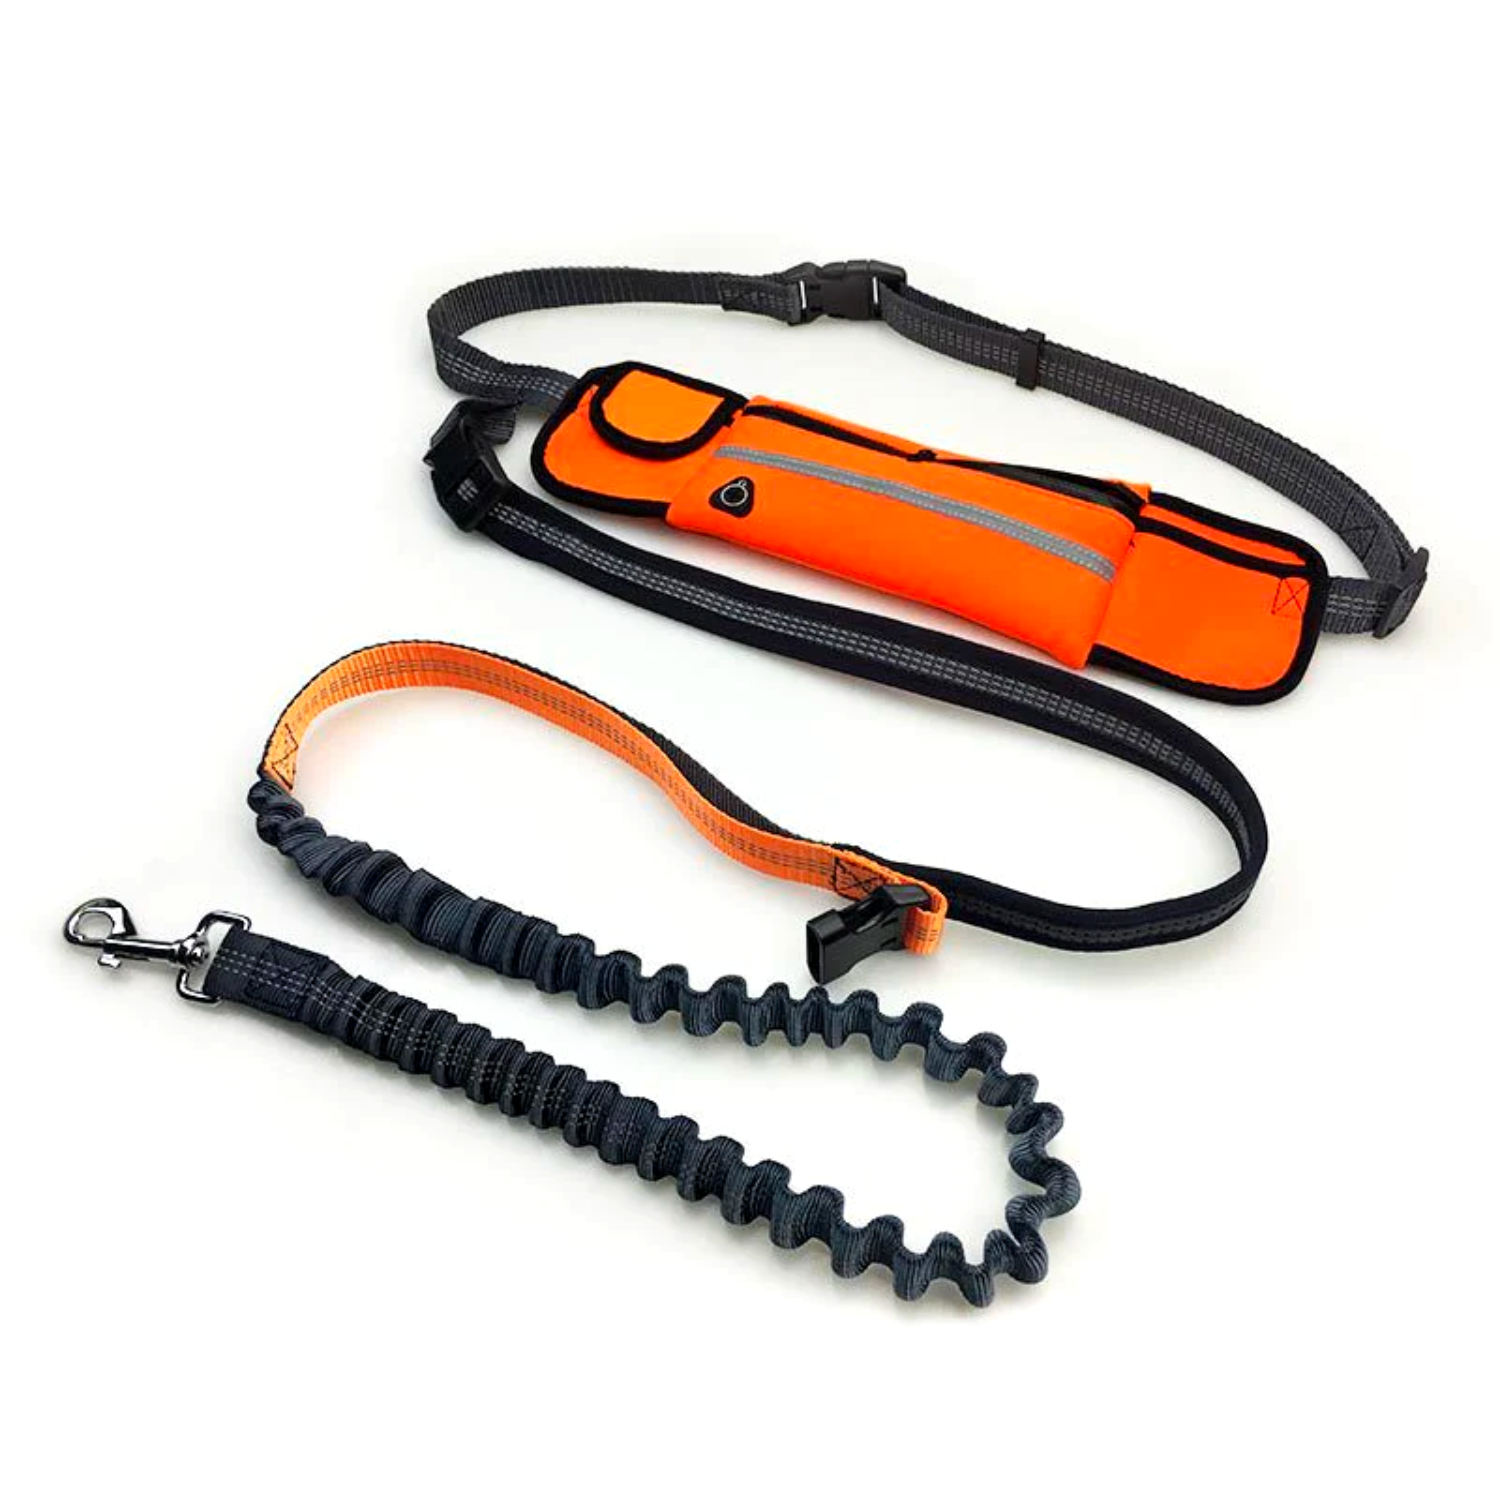 Hands Free Dog Leash for Running Training Retractable Bungee Dog Running Waist Leash for Medium to Large Dogs